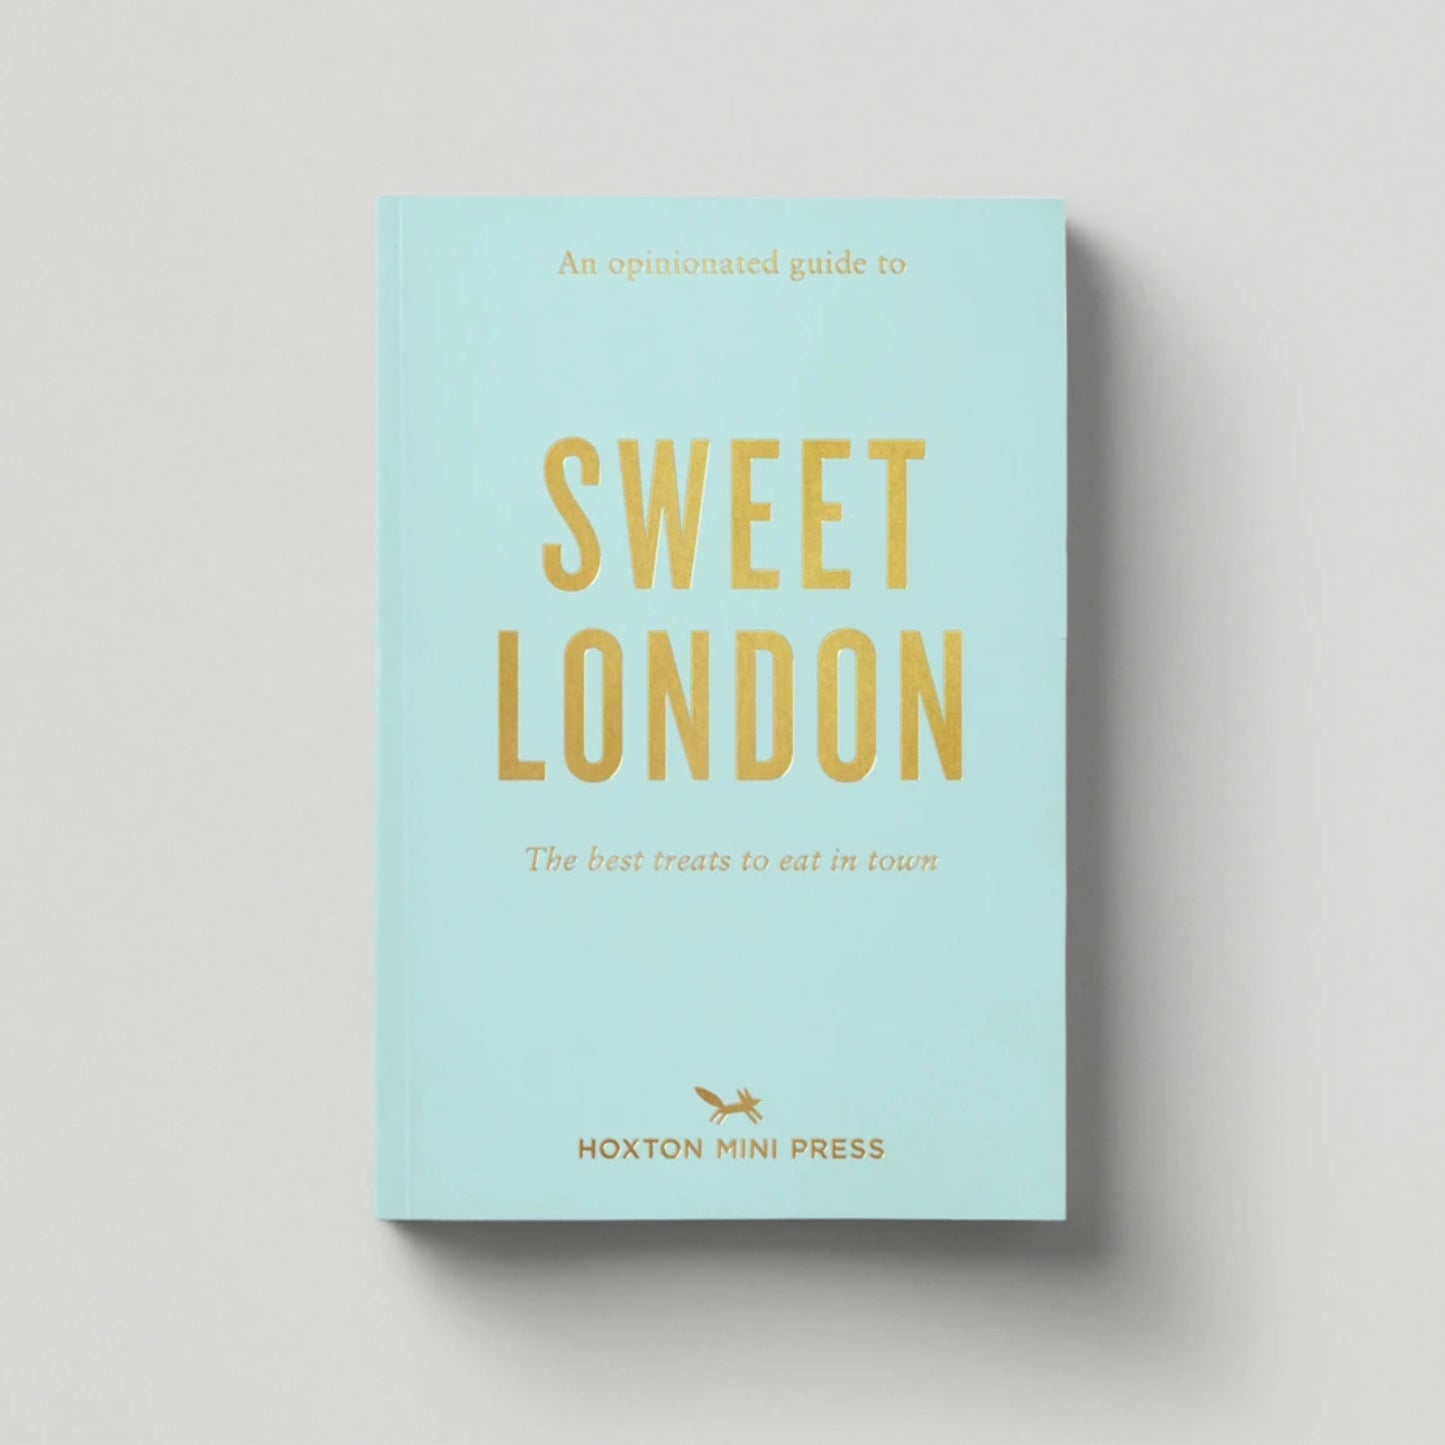 An Opinionated Guide to Sweet London